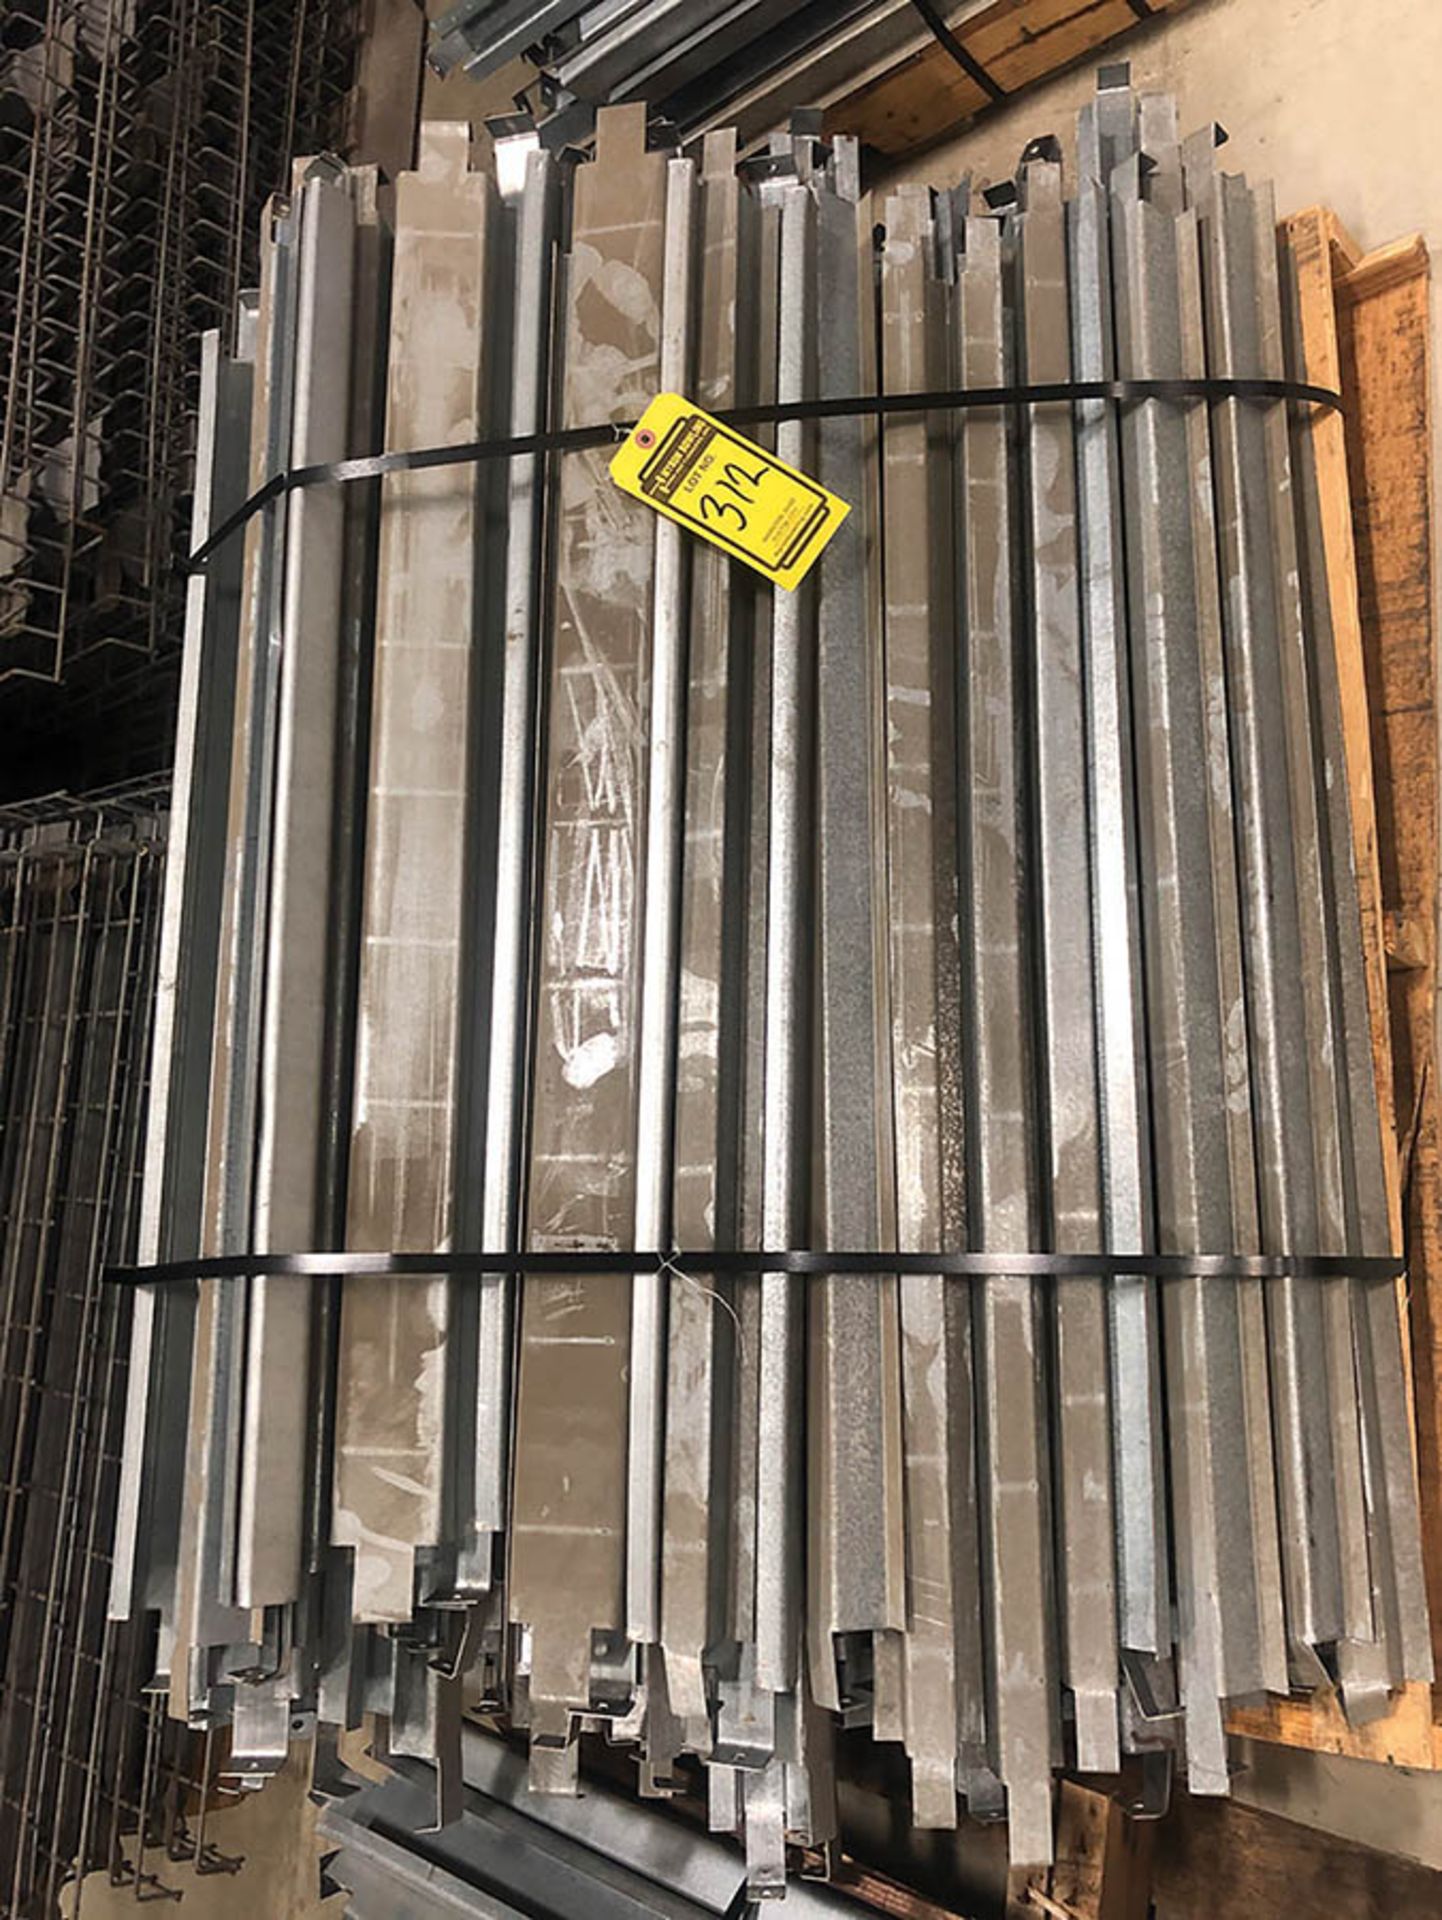 SKID OF FLANGED PALLET SUPPORTS